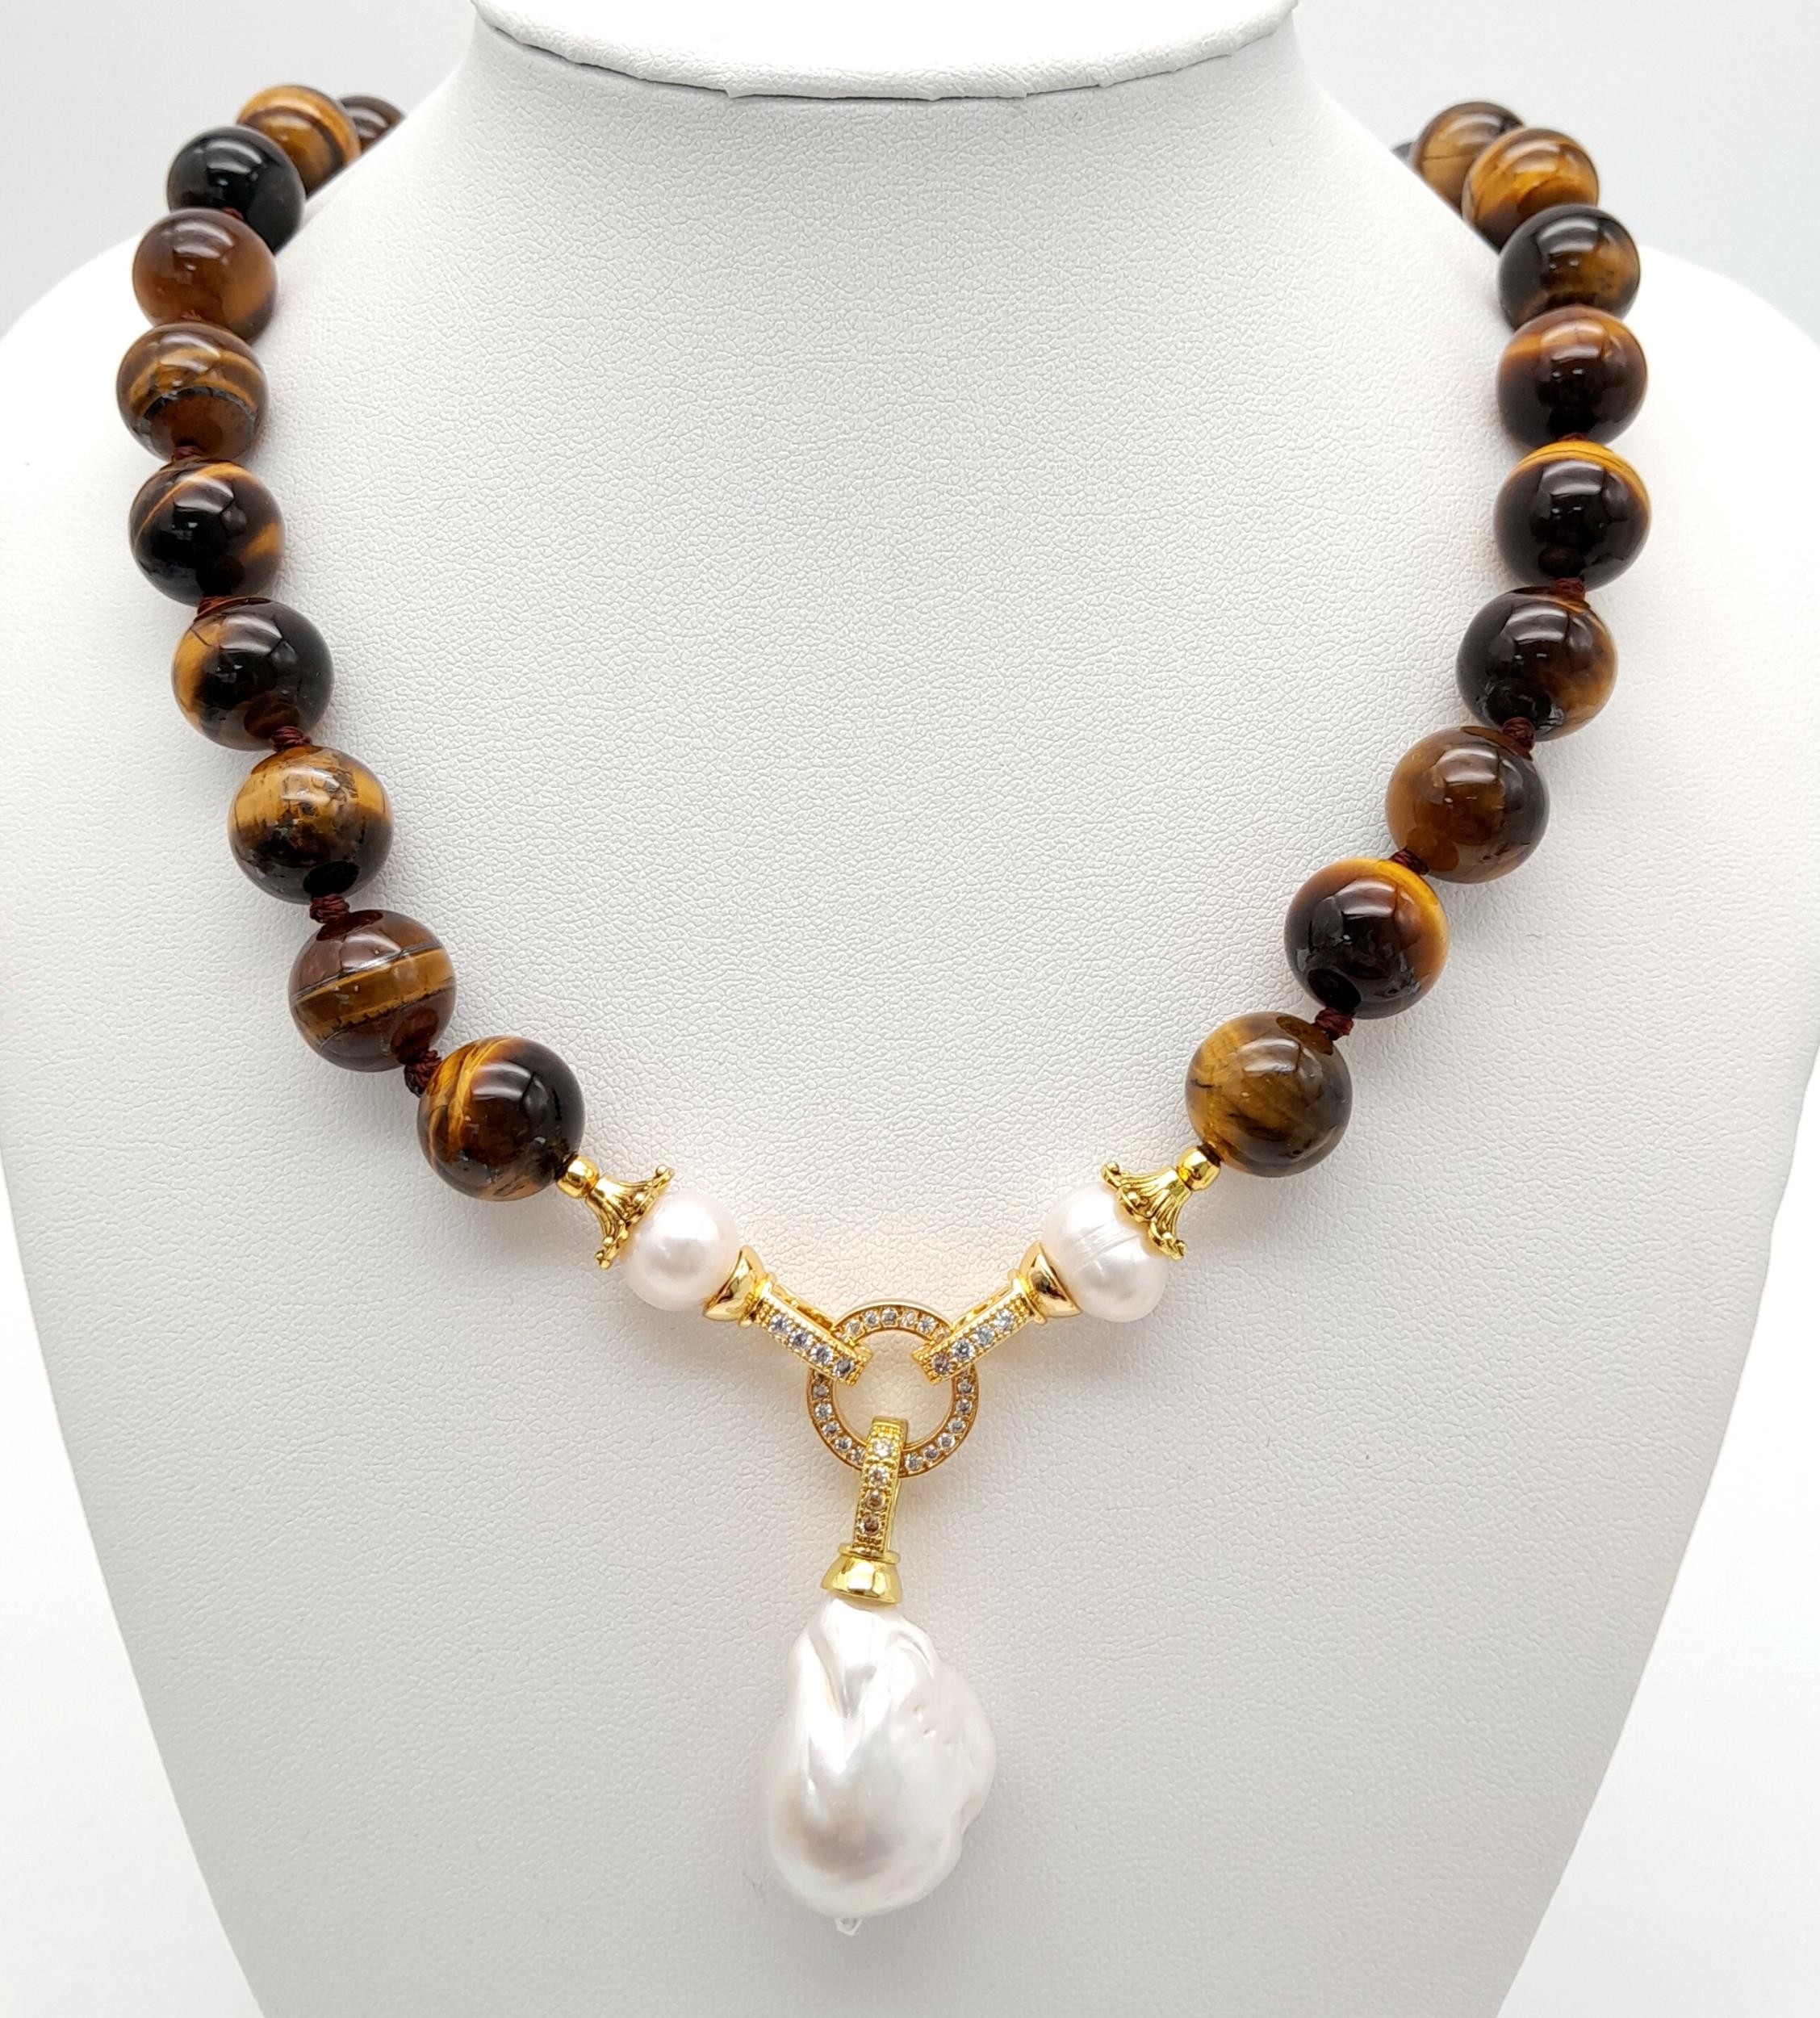 A Rich Tigers Eye Beaded Necklace with a Hanging Keisha Baroque Pearl Pendant. 12mm beads.